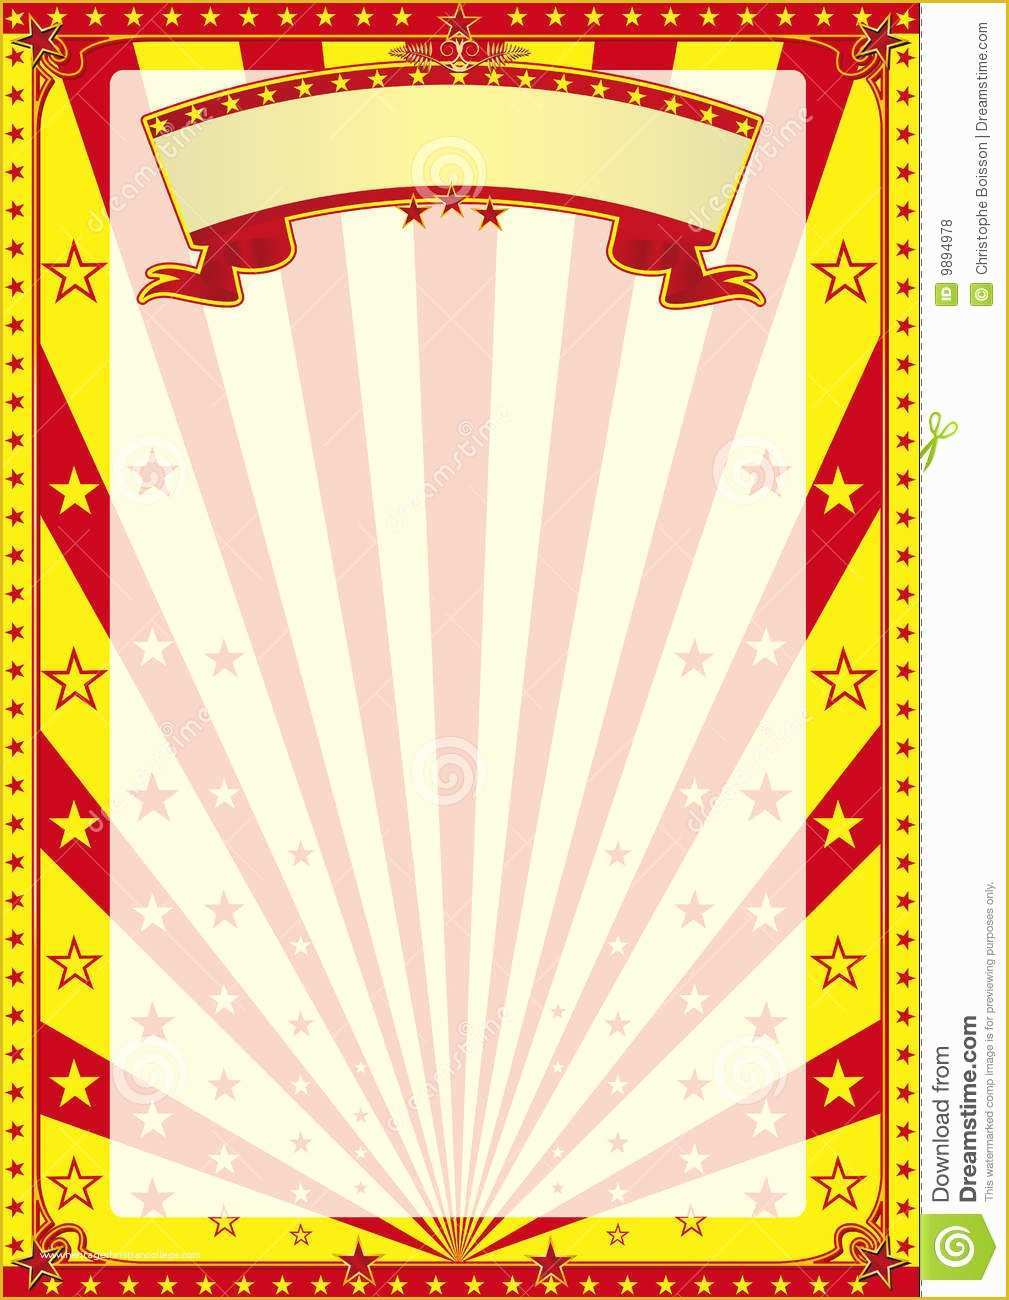 Circus Poster Template Free Download Of Circus Gestripte Affiche Stock Illustratie Afbeelding